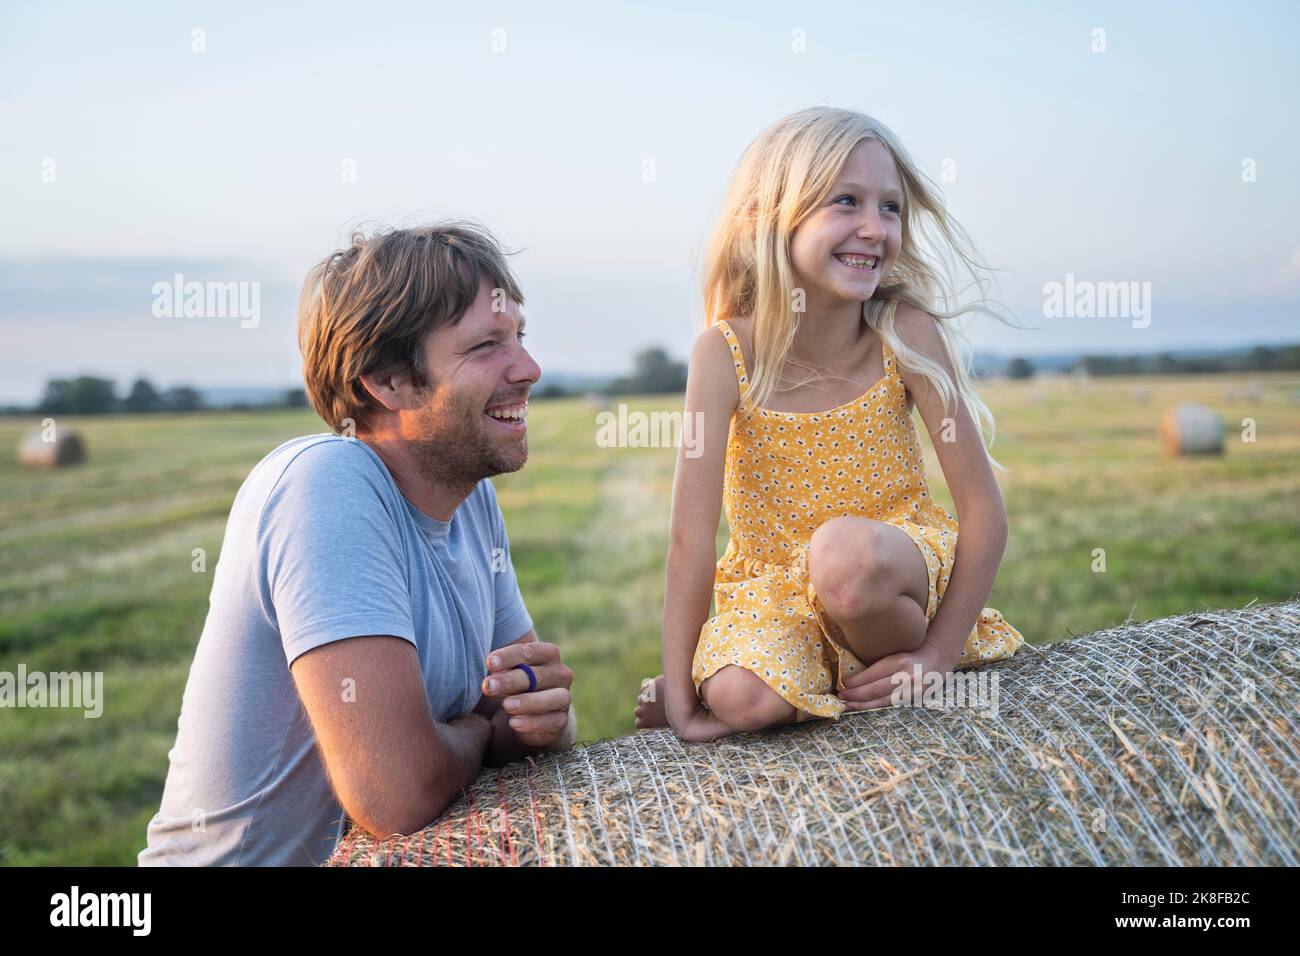 Happy man standing by girl sitting on haystack Stock Photo